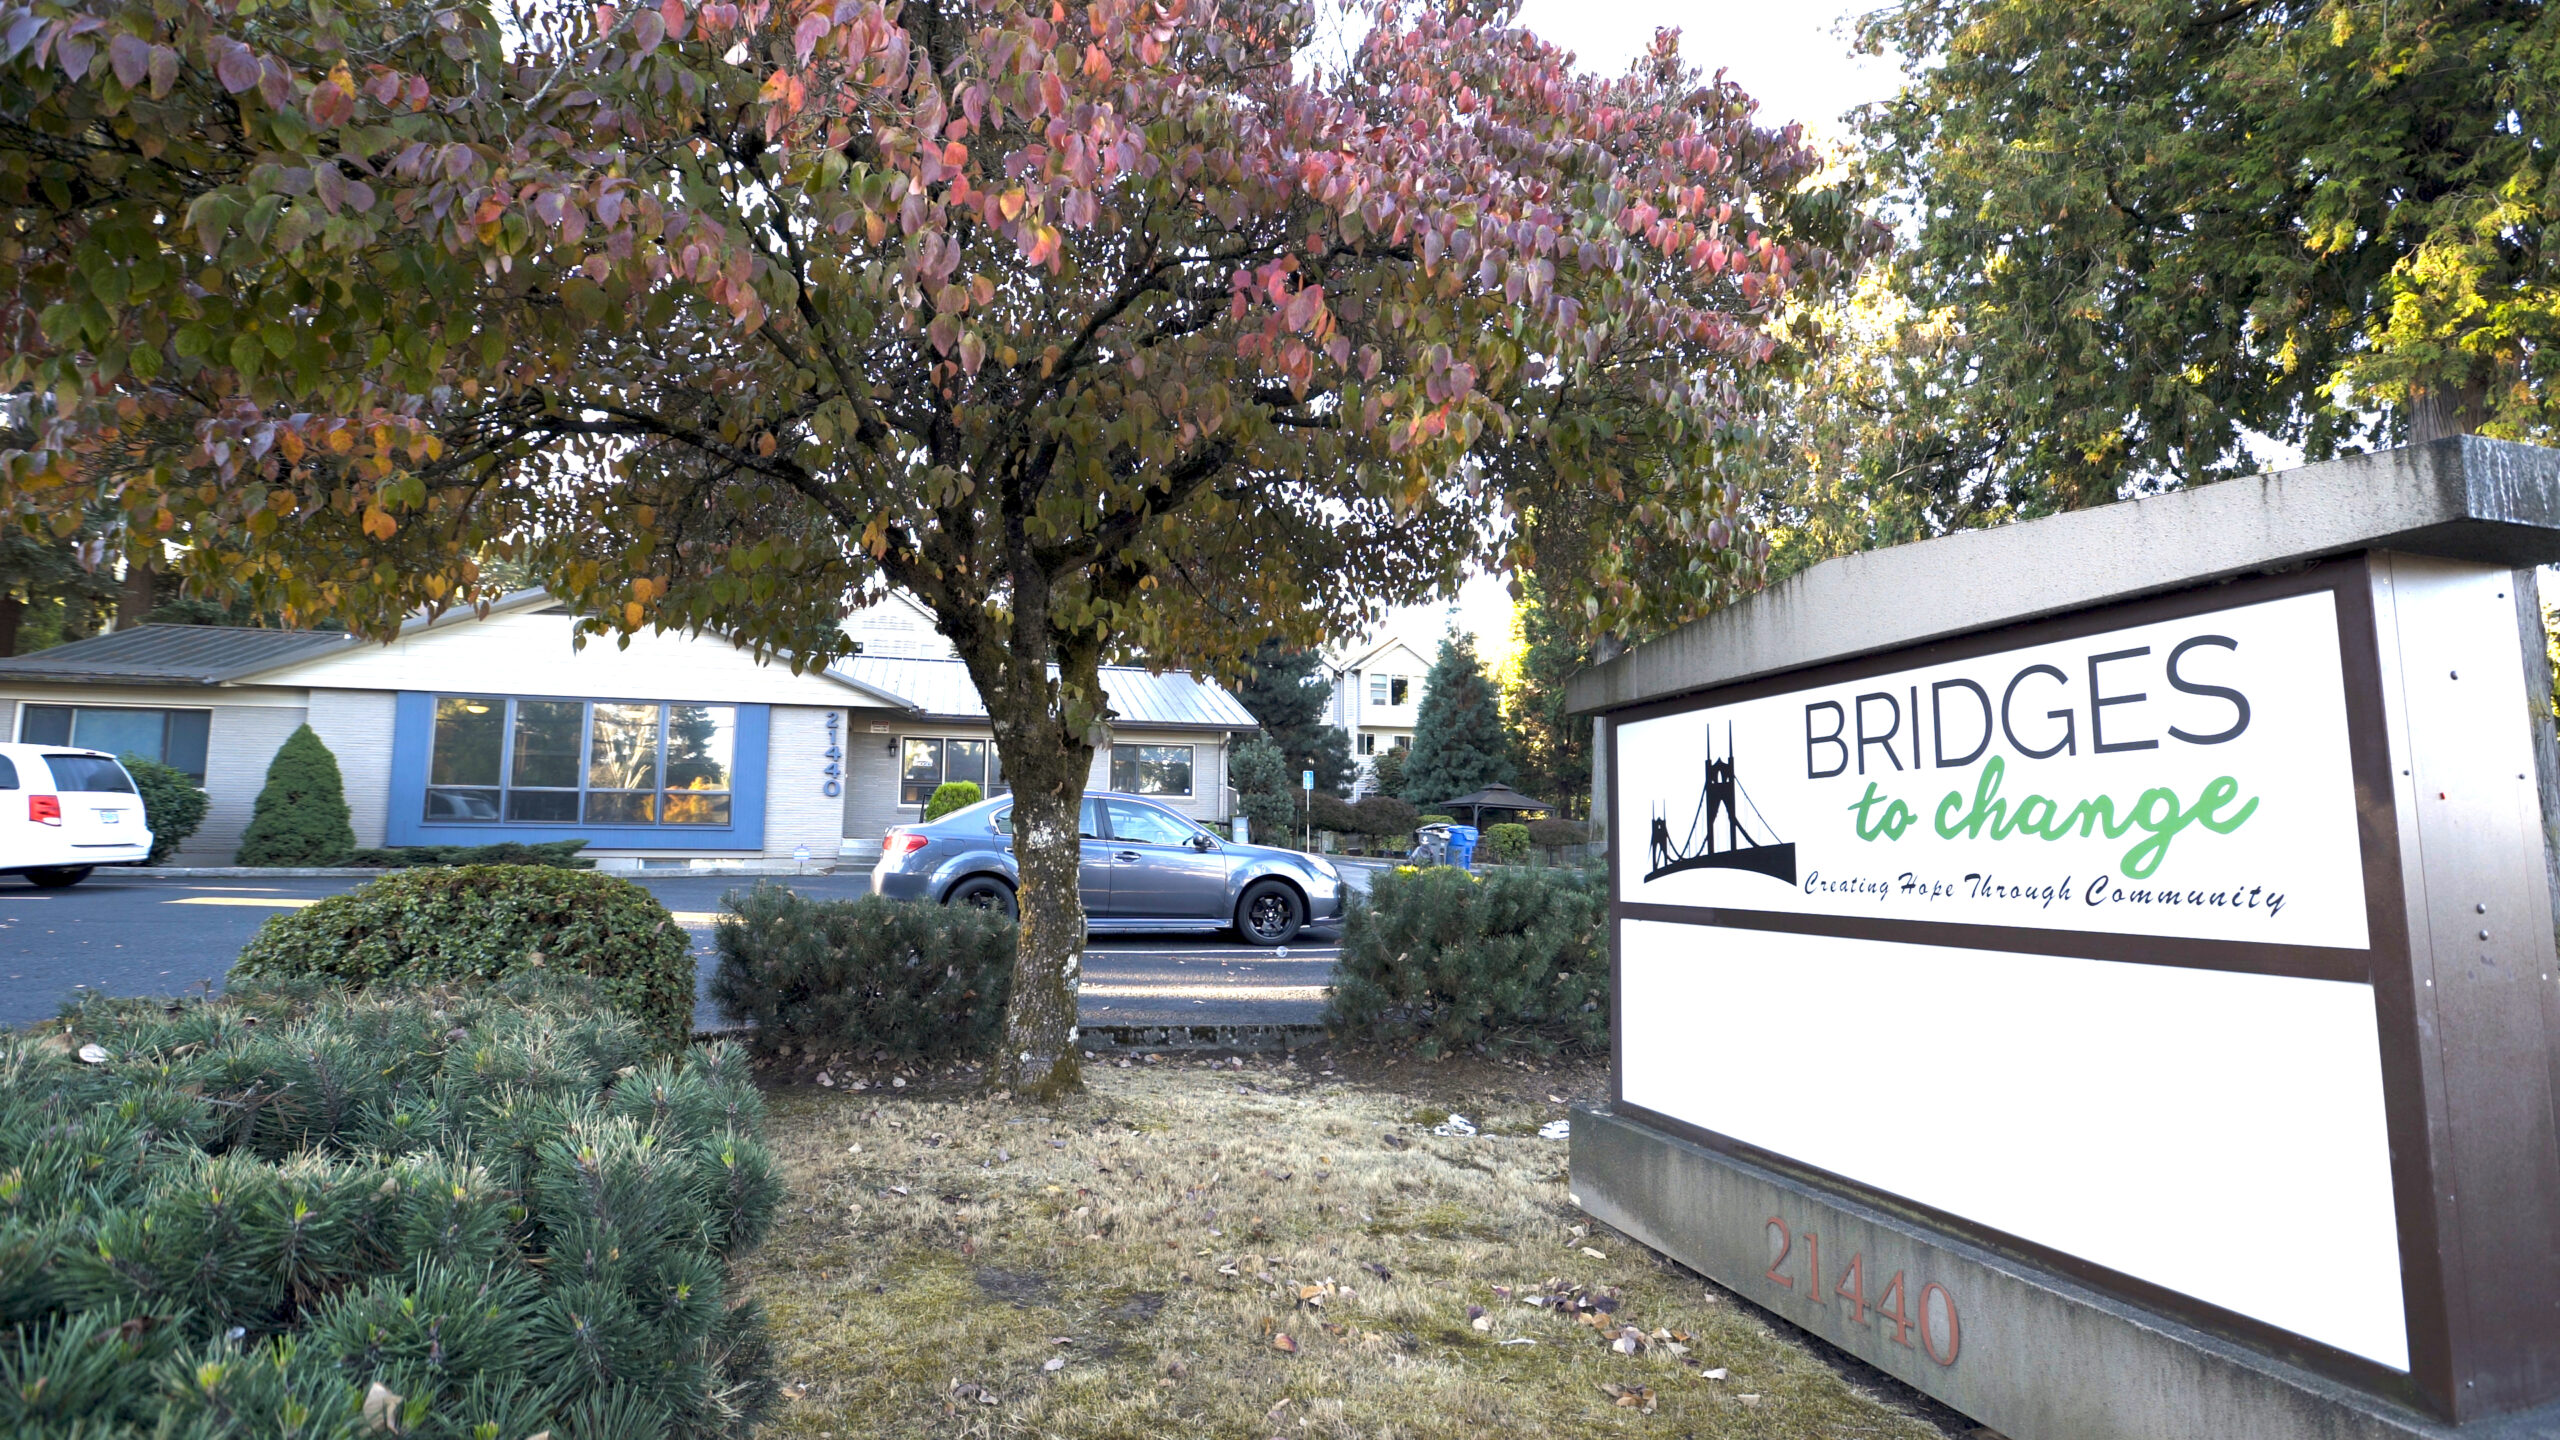 a tree with its leaves changing color provides shade for the bridges to change club hope sign in a quaint neighborhood